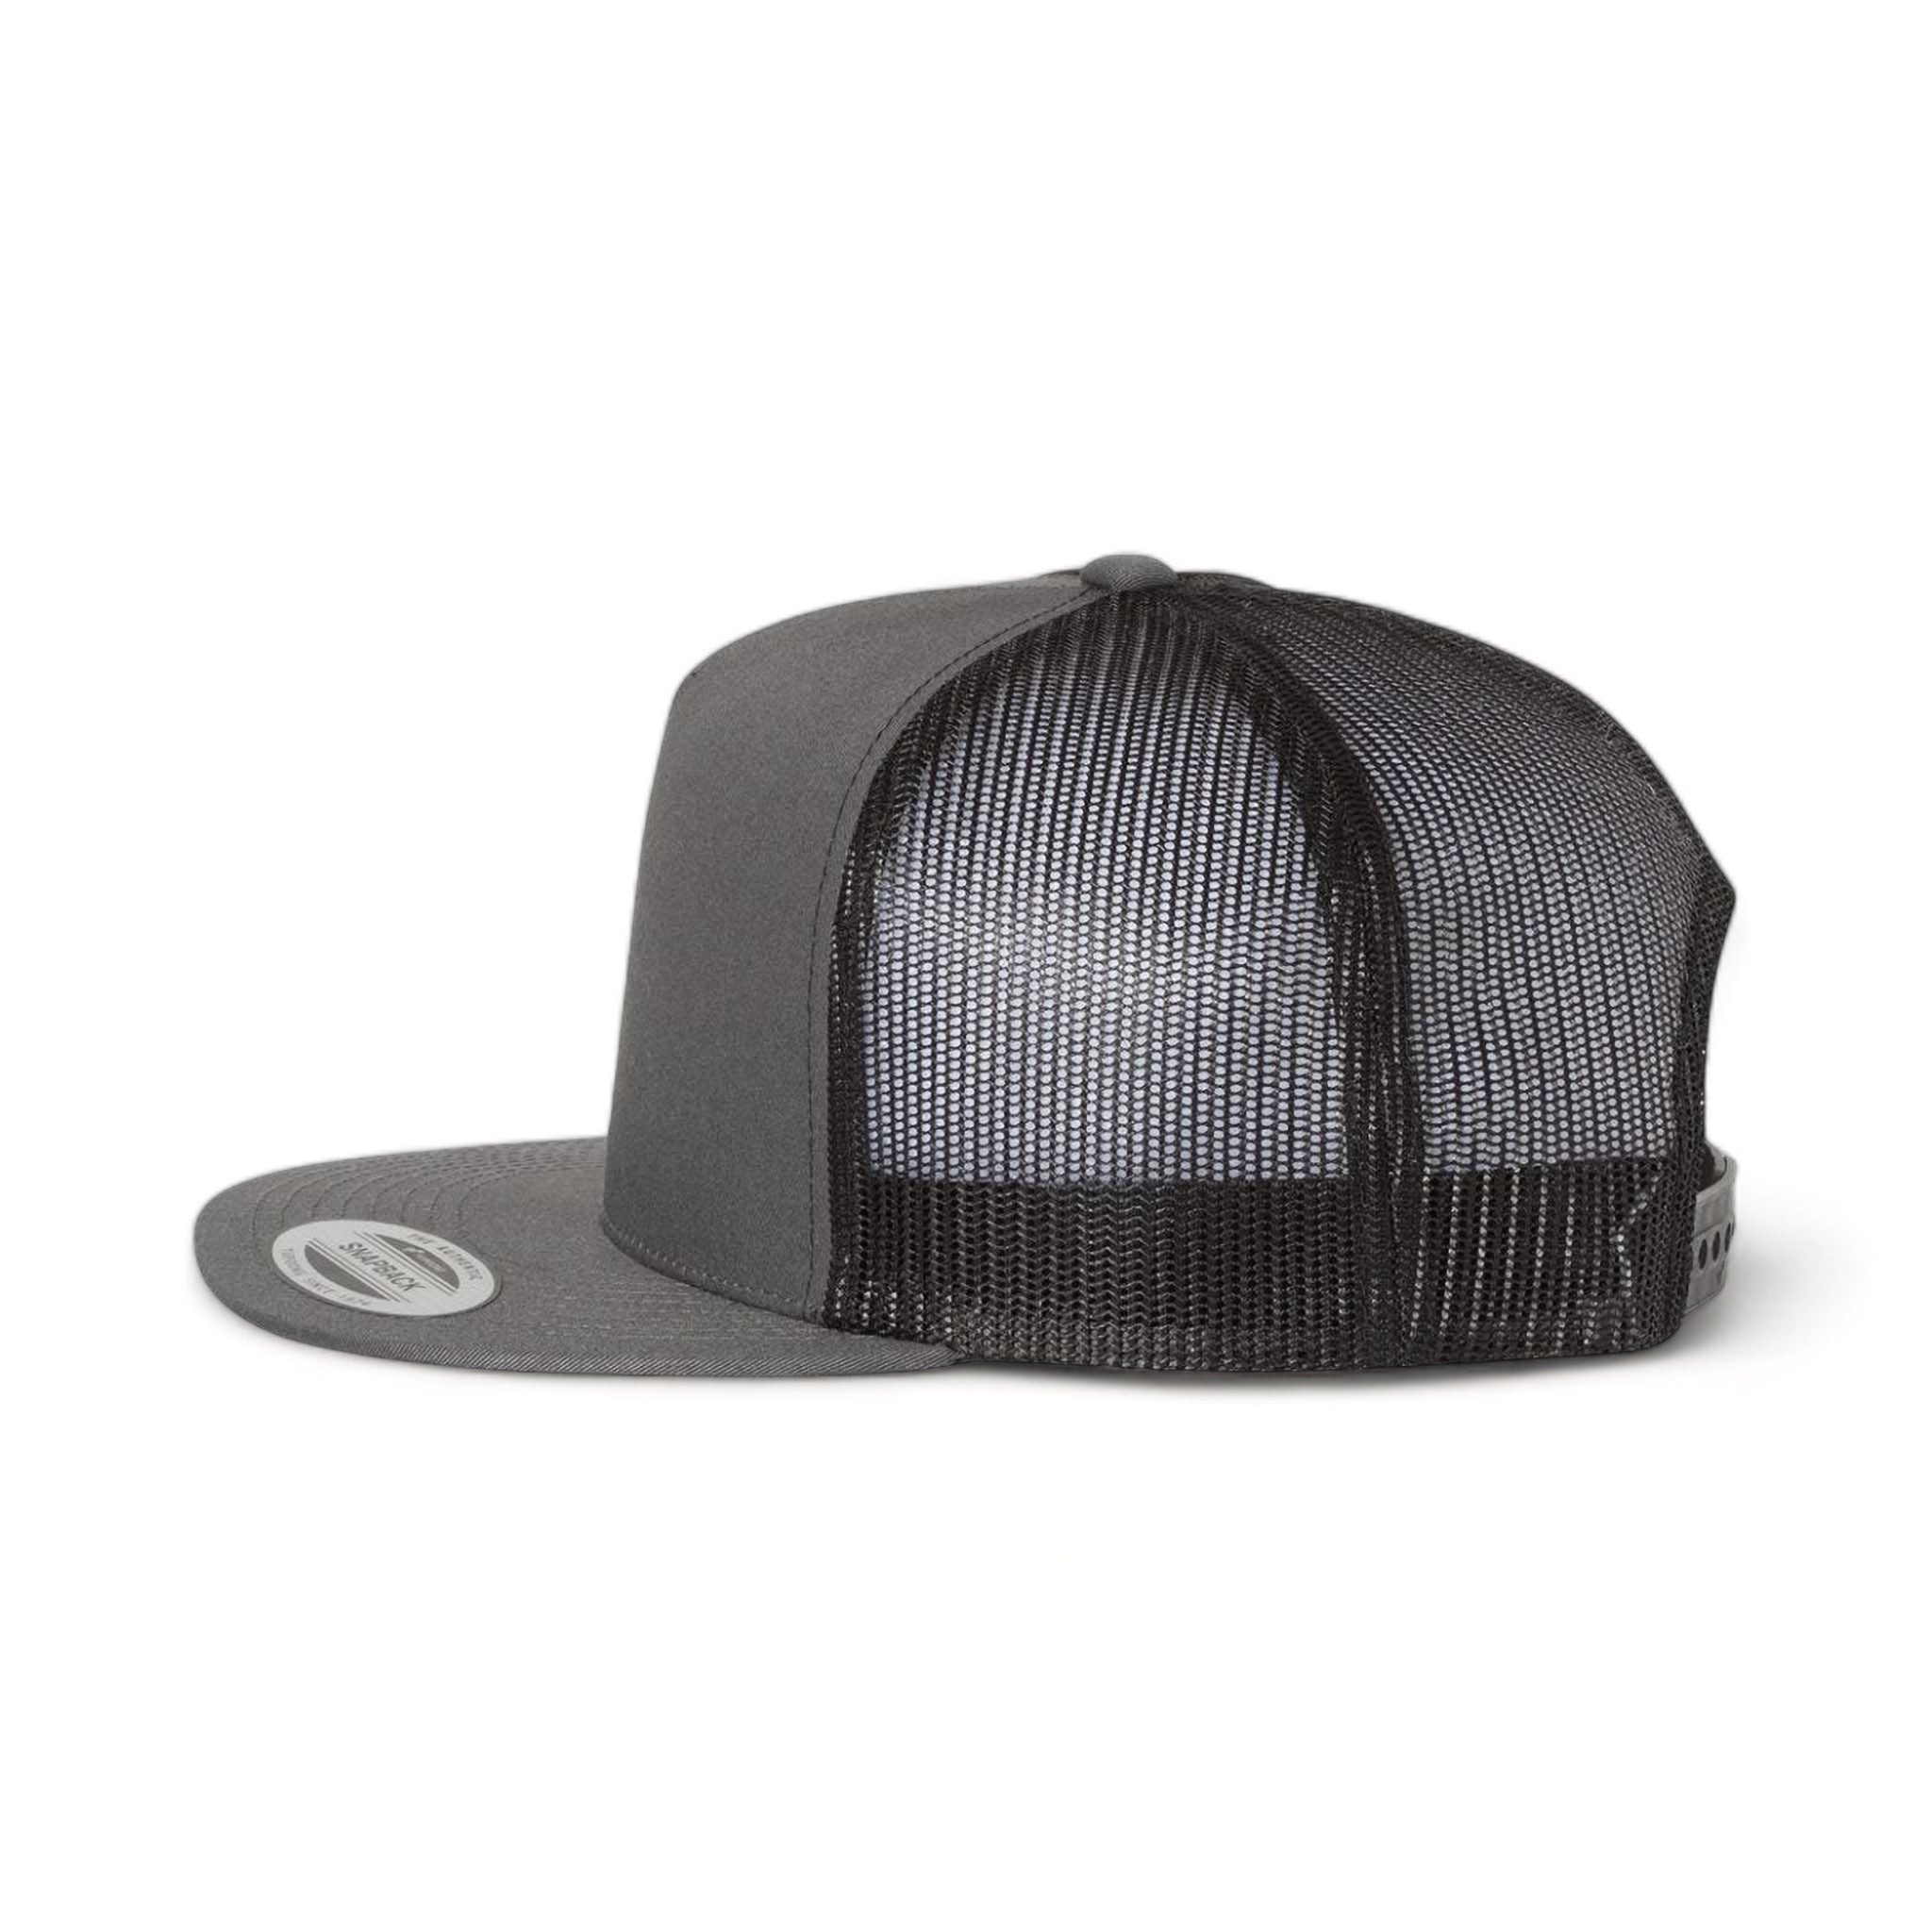 Side view of YP Classics 6006 custom hat in charcoal and black